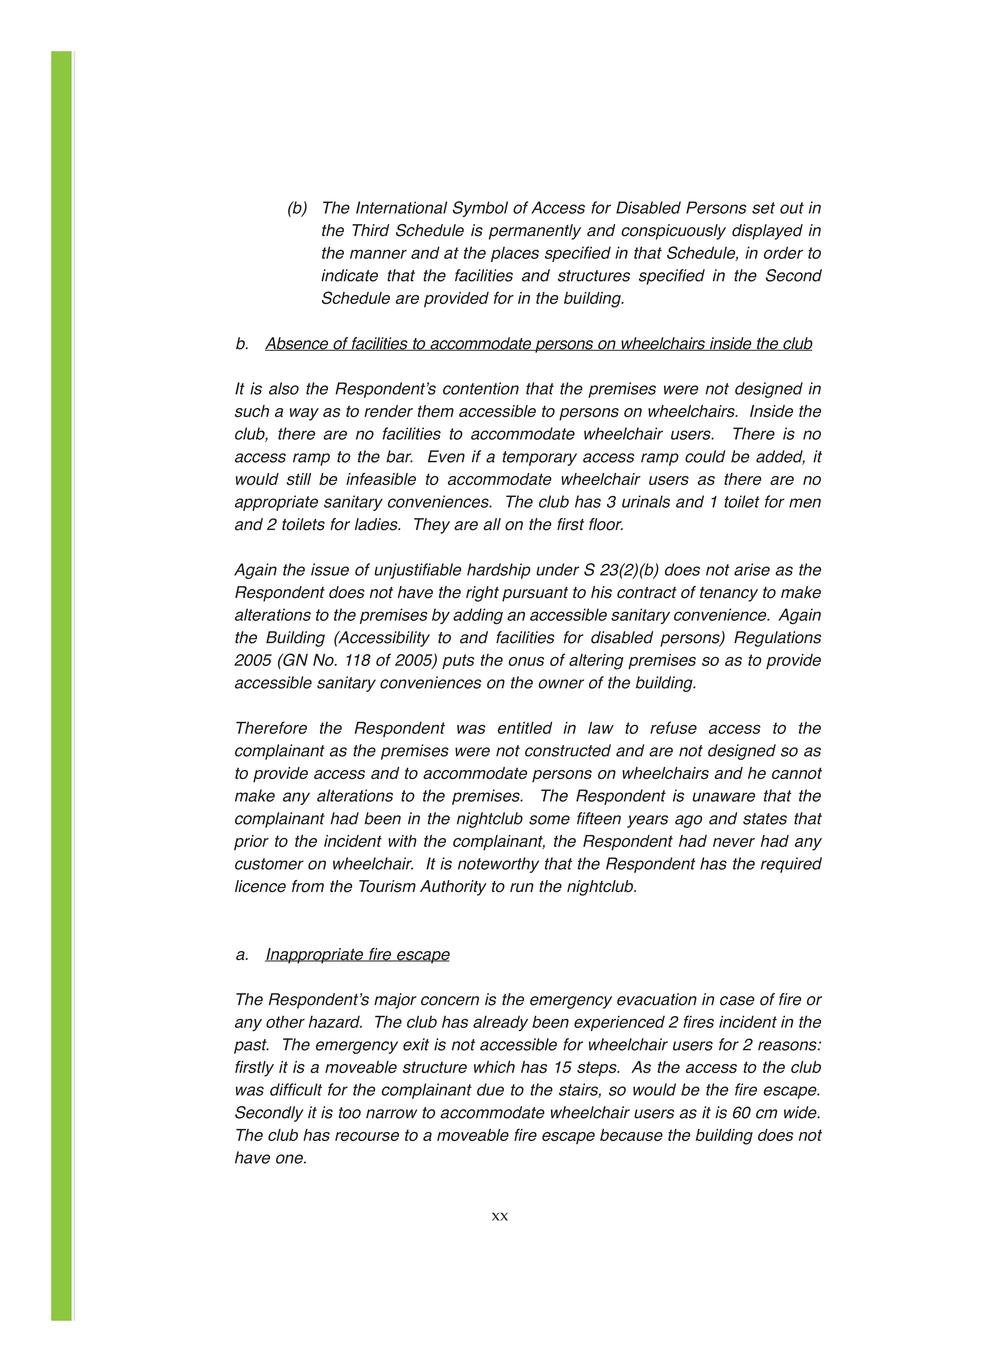 Equal Opportunities Commission Report 2014